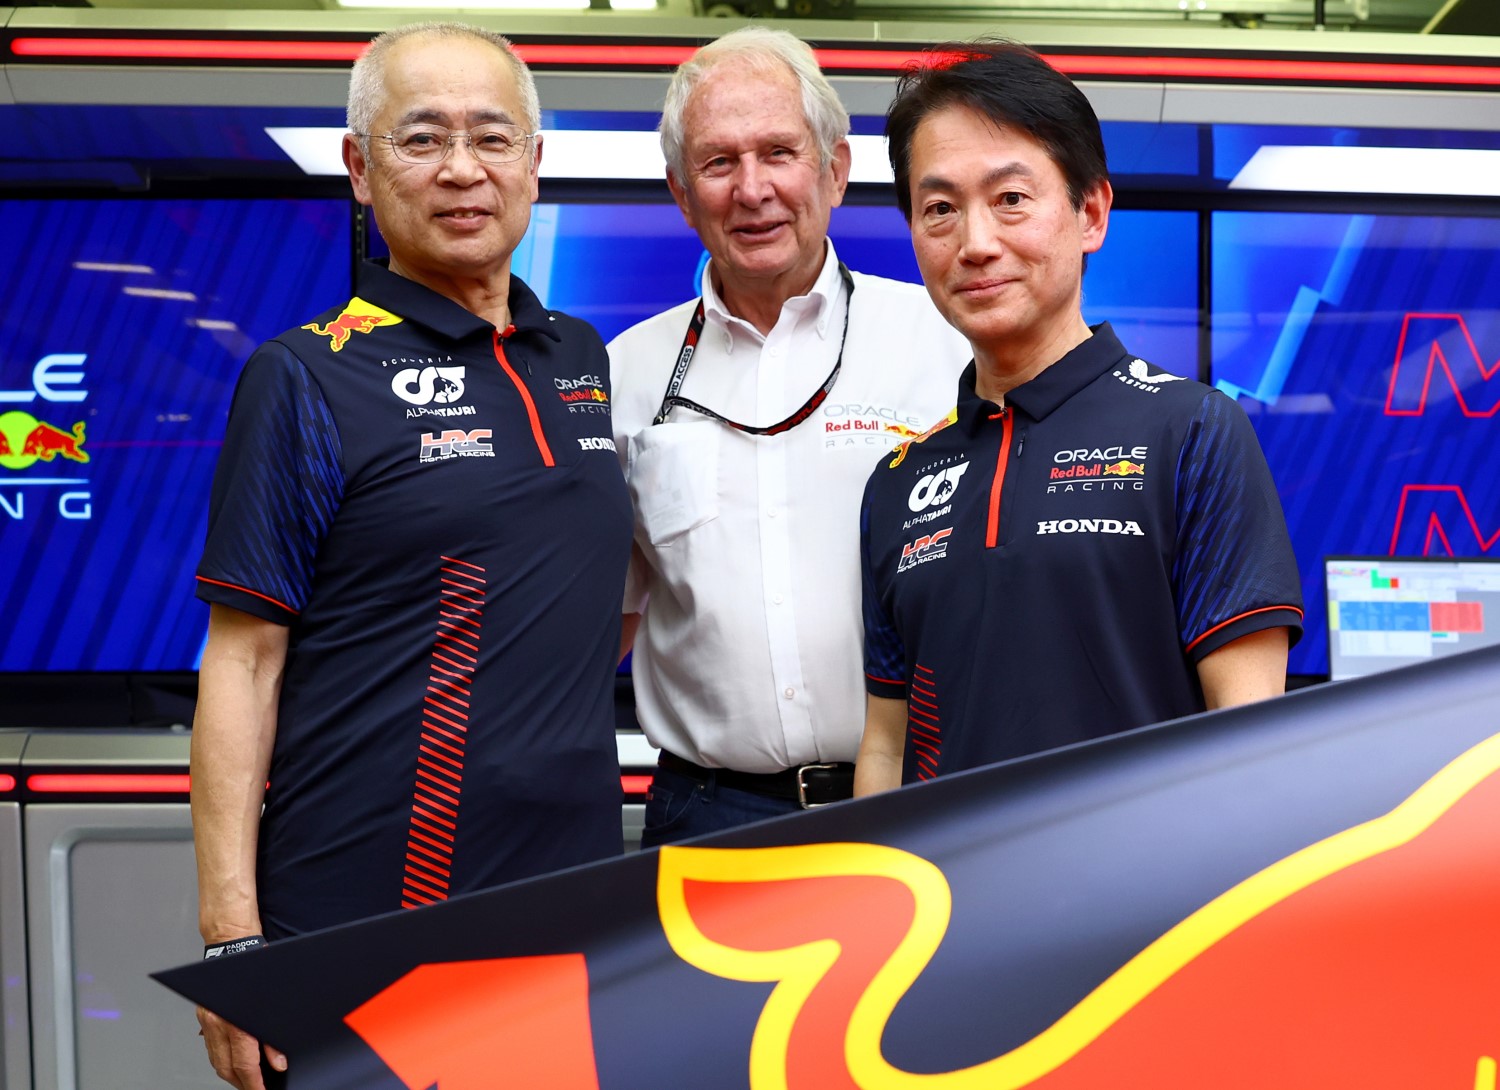 (L-R) Yasuaki Asaki, HRC Director, Red Bull Racing Team Consultant Dr Helmut Marko and Koji Watanabe, HRC President, pose for a photo in the Red Bull Racing garage prior to the F1 Grand Prix of Bahrain at Bahrain International Circuit on March 05, 2023 in Bahrain, Bahrain. (Photo by Mark Thompson/Getty Images) // Getty Images / Red Bull Content Pool